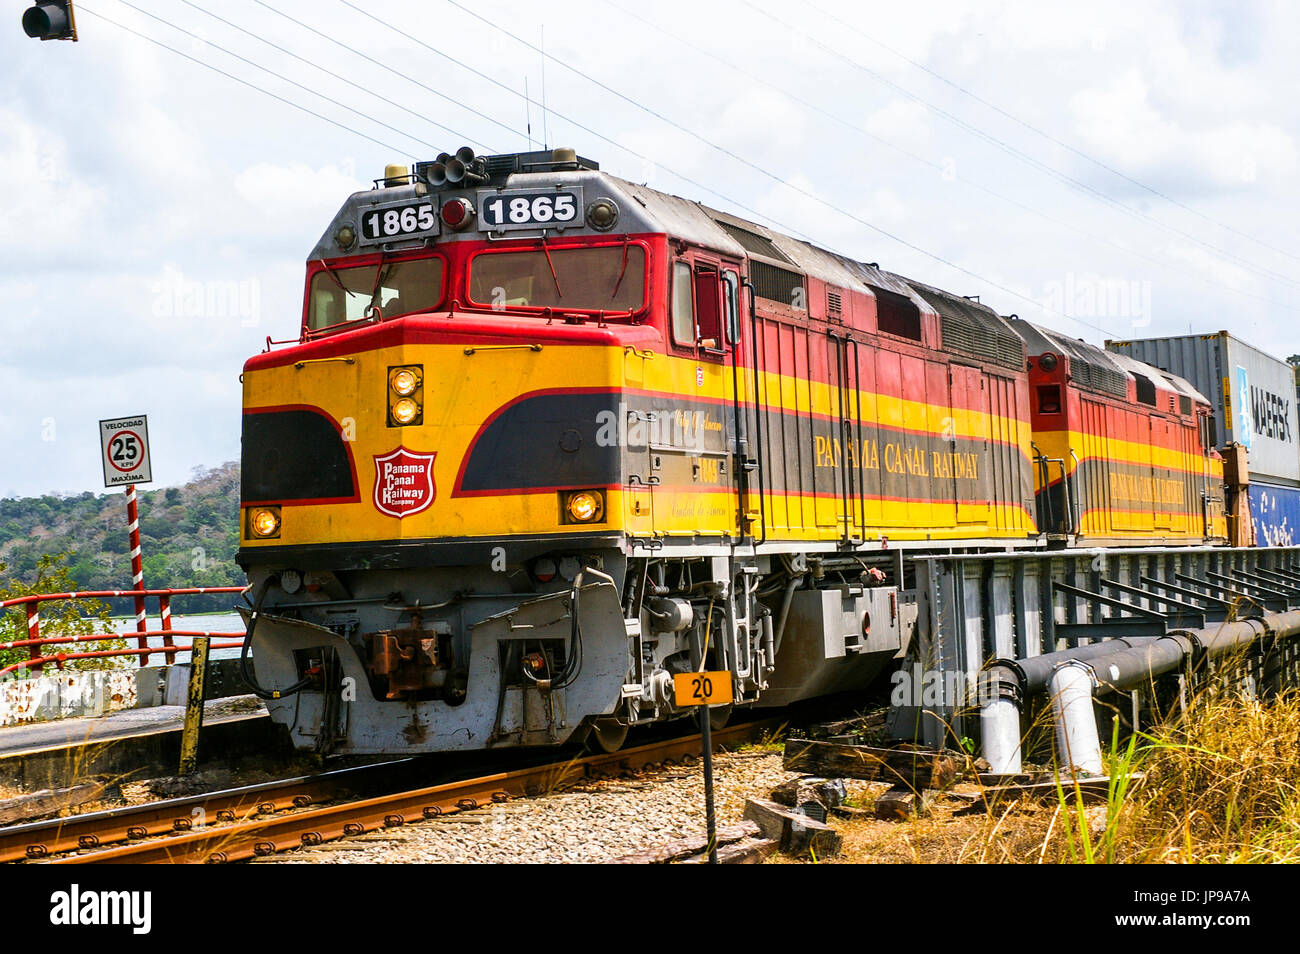 Images of the panama canal railway trains and locomotives traveling from Panama City to Colon Stock Photo